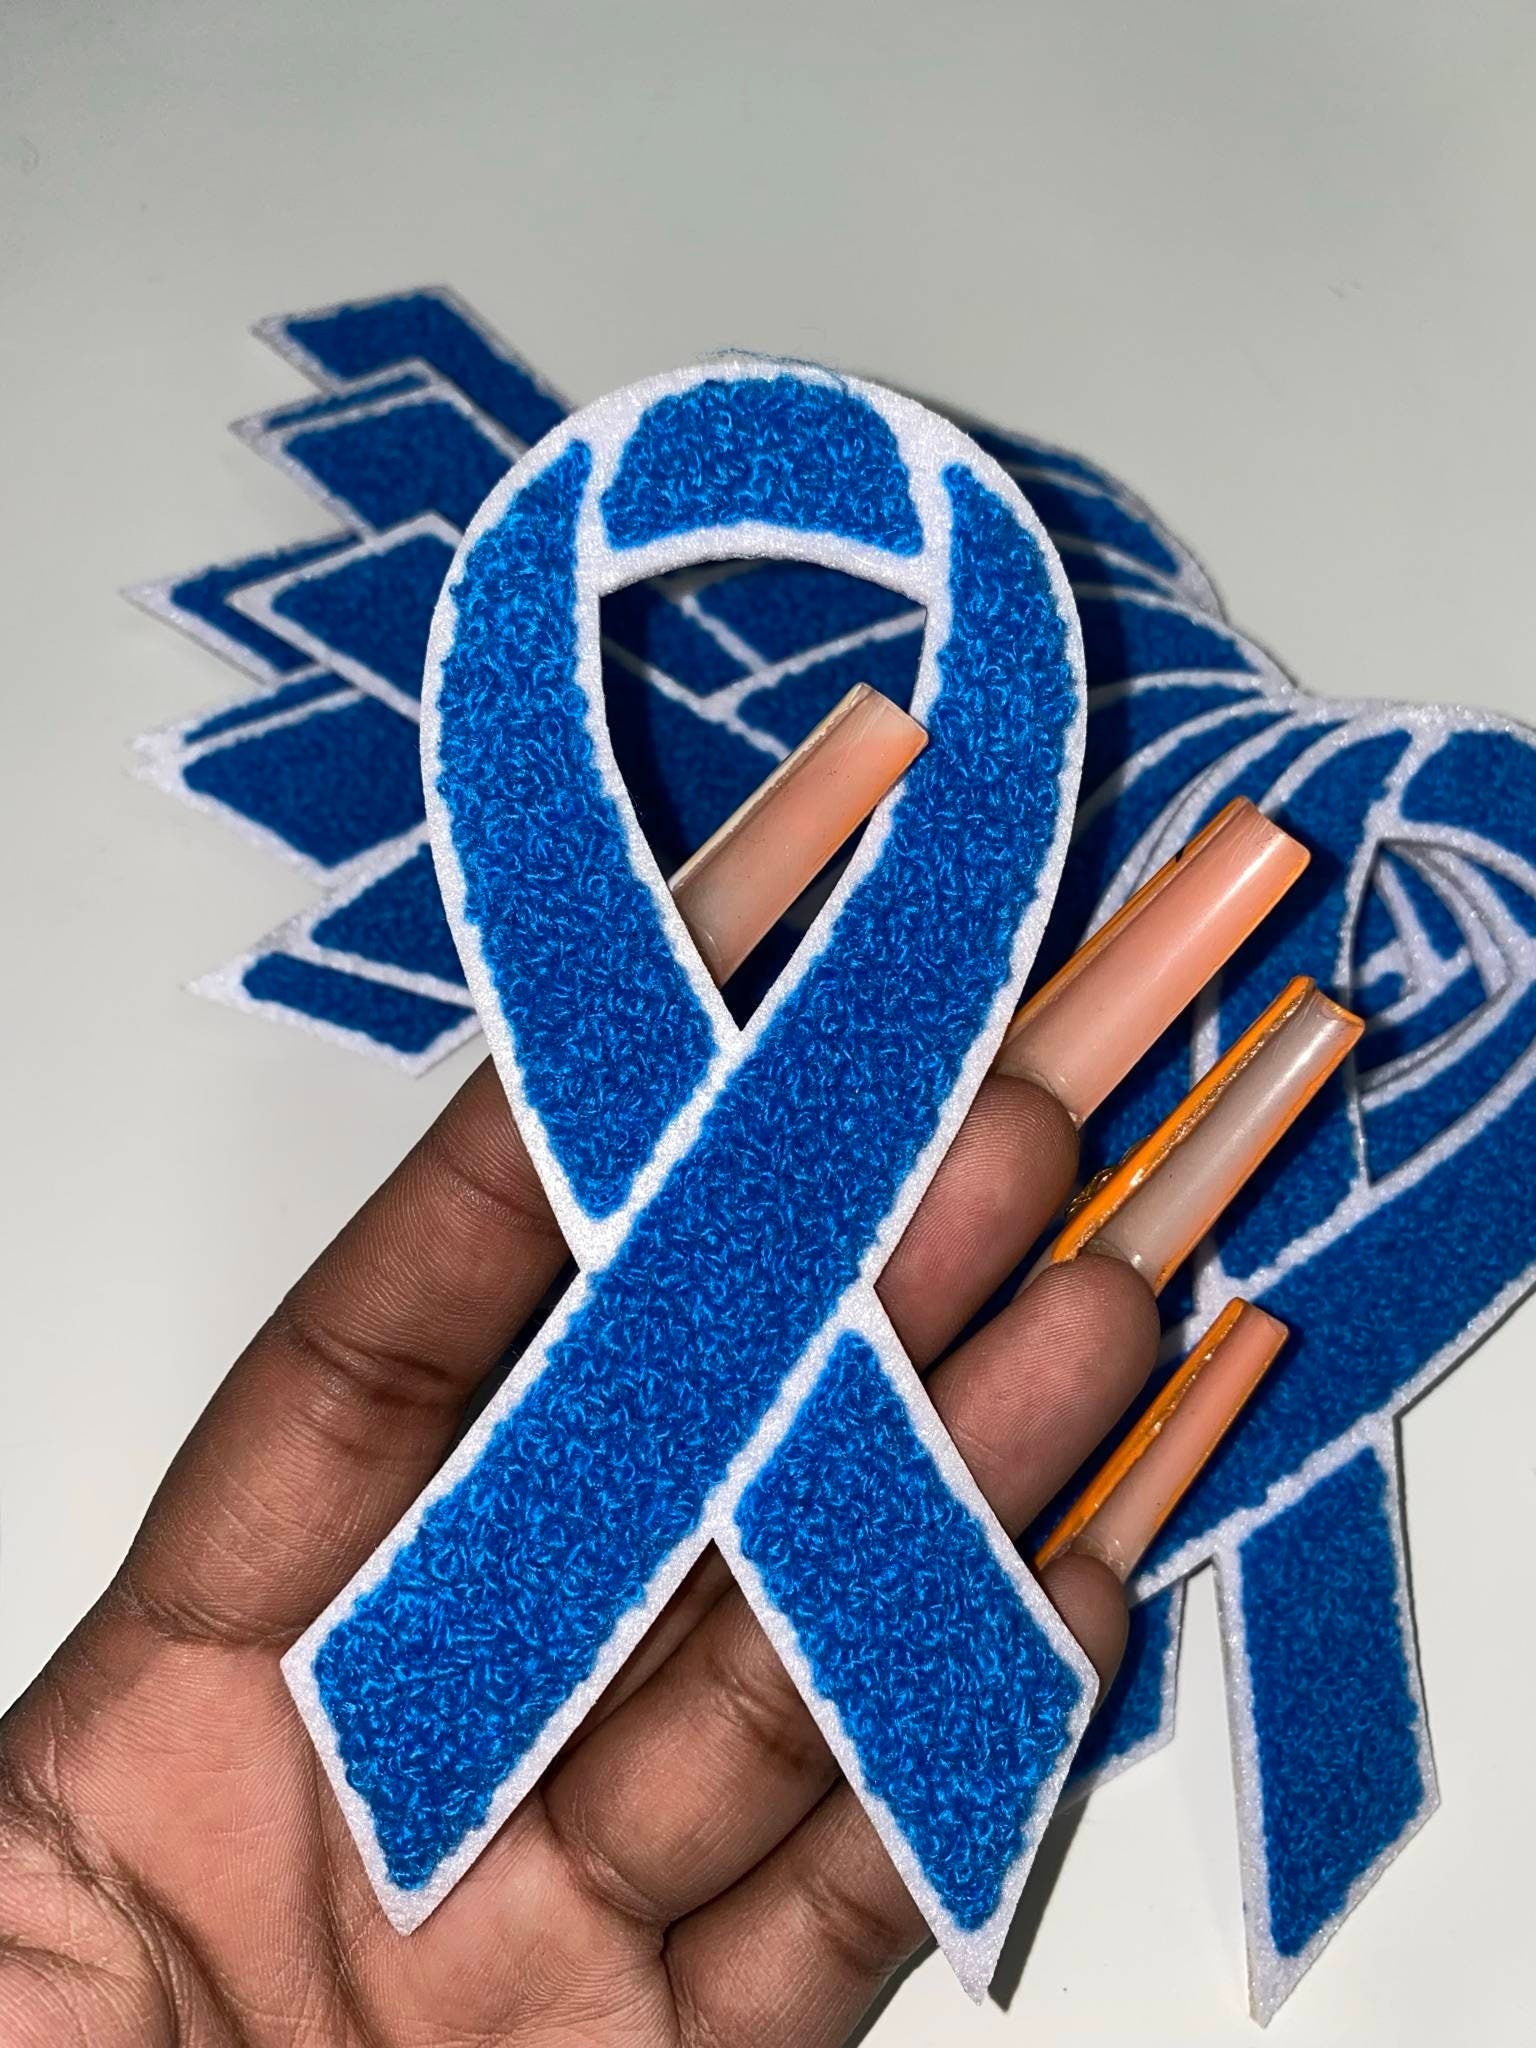 New 1-pc, Colon & Rectal Cancer "Blue Chenille" Awareness Ribbon Patch, 5.5" Iron or Sew-on, Cancer  Patch/Applique, Support Ribbon